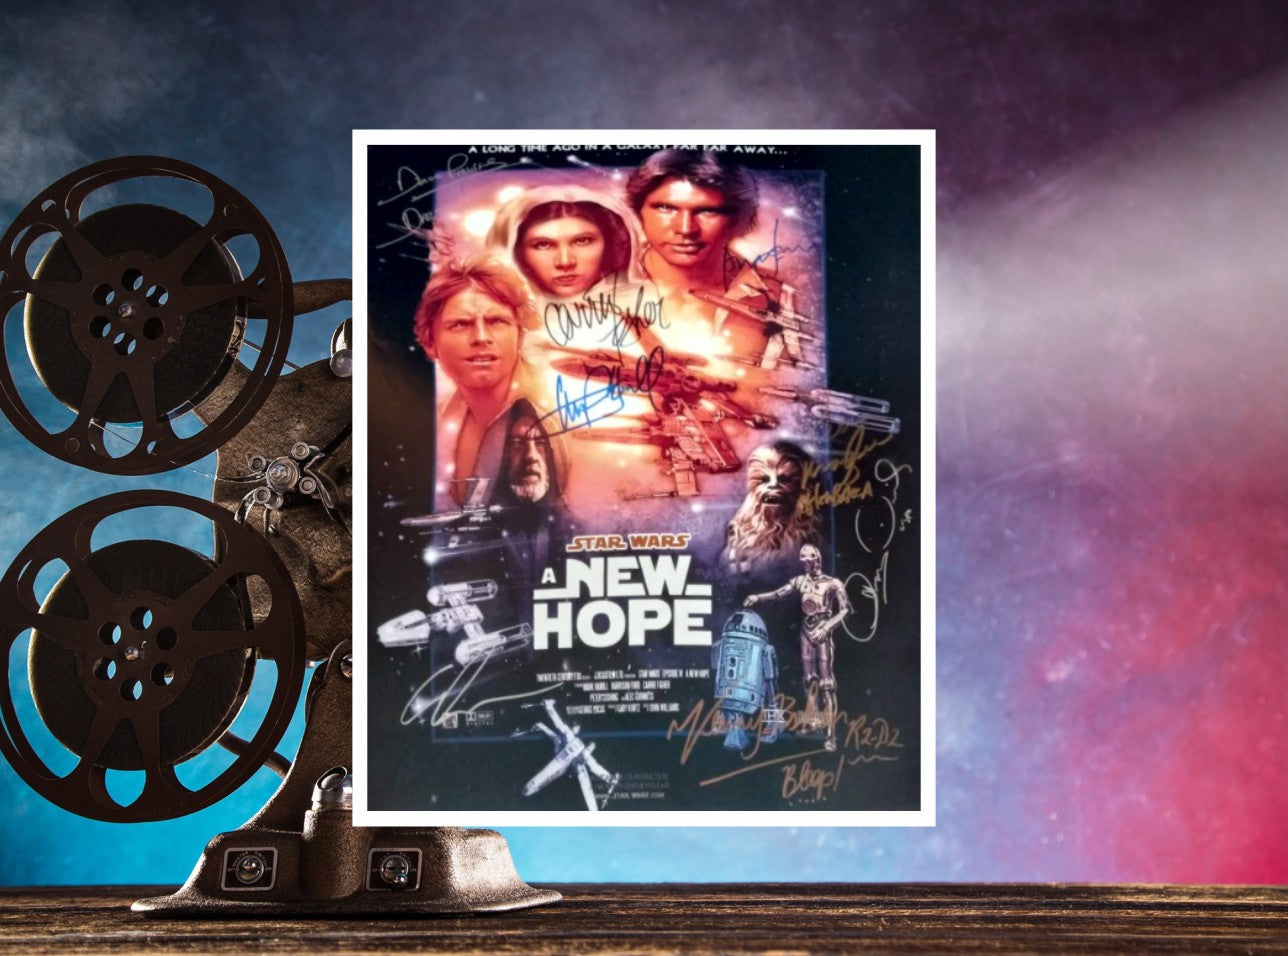 Star Wars A New Hope Carrie Fisher Mark Hamill Harrison Ford George Lucas 16 x 20 photo signed with proof